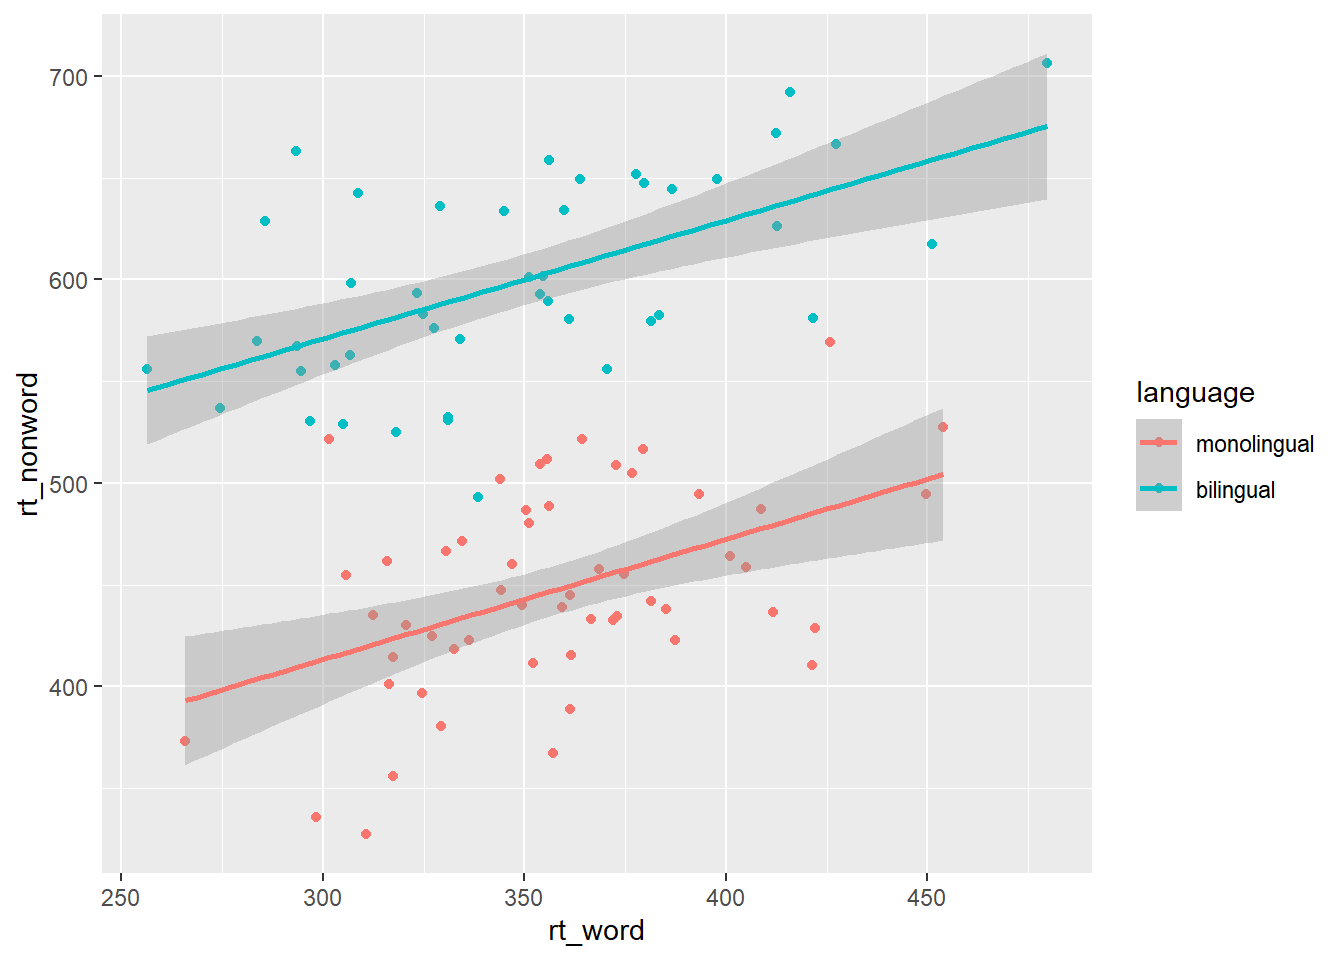 Scatterplot with data grouped by language group